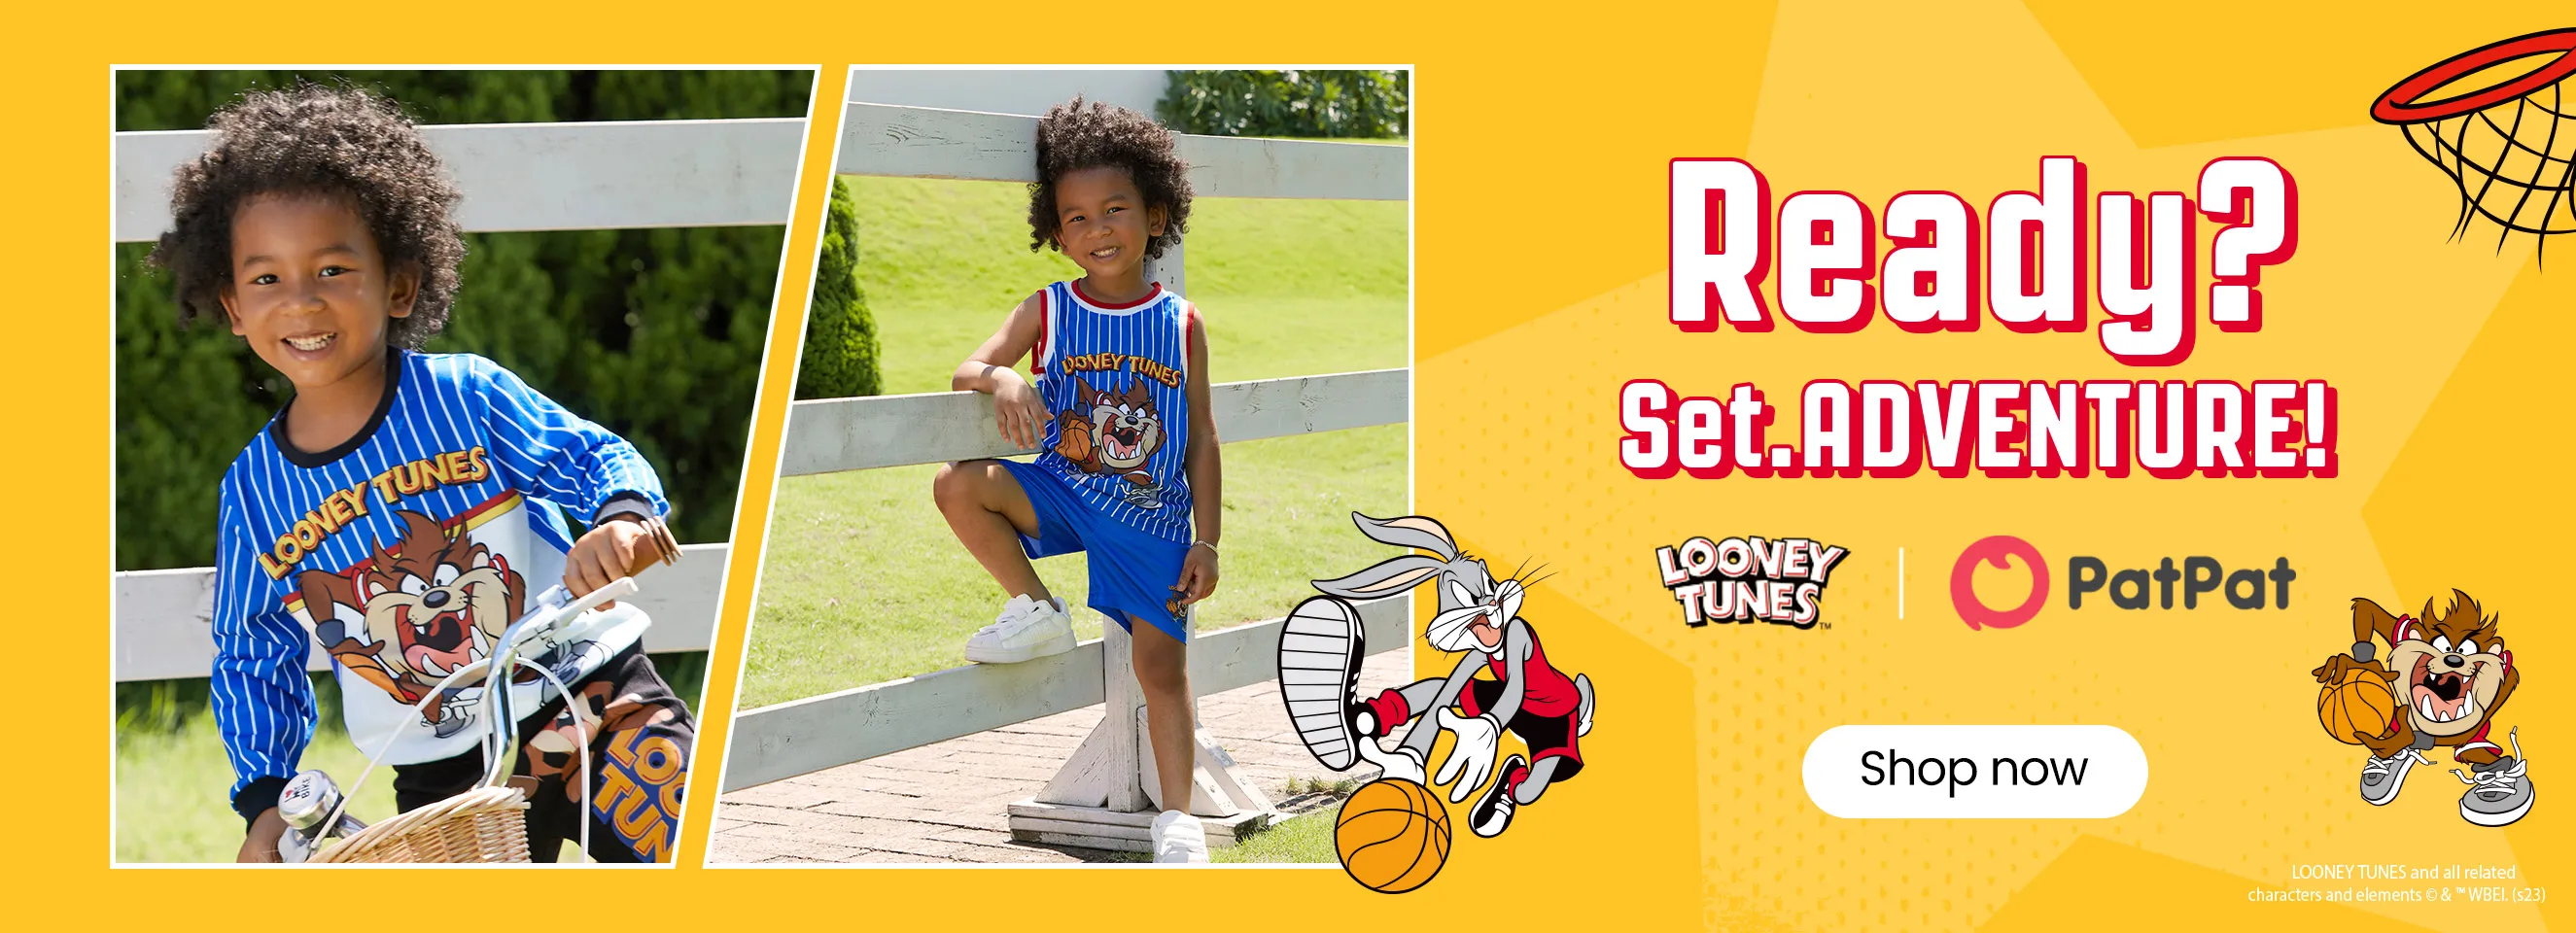 Click it to join PatPat X Looney Tunes activity